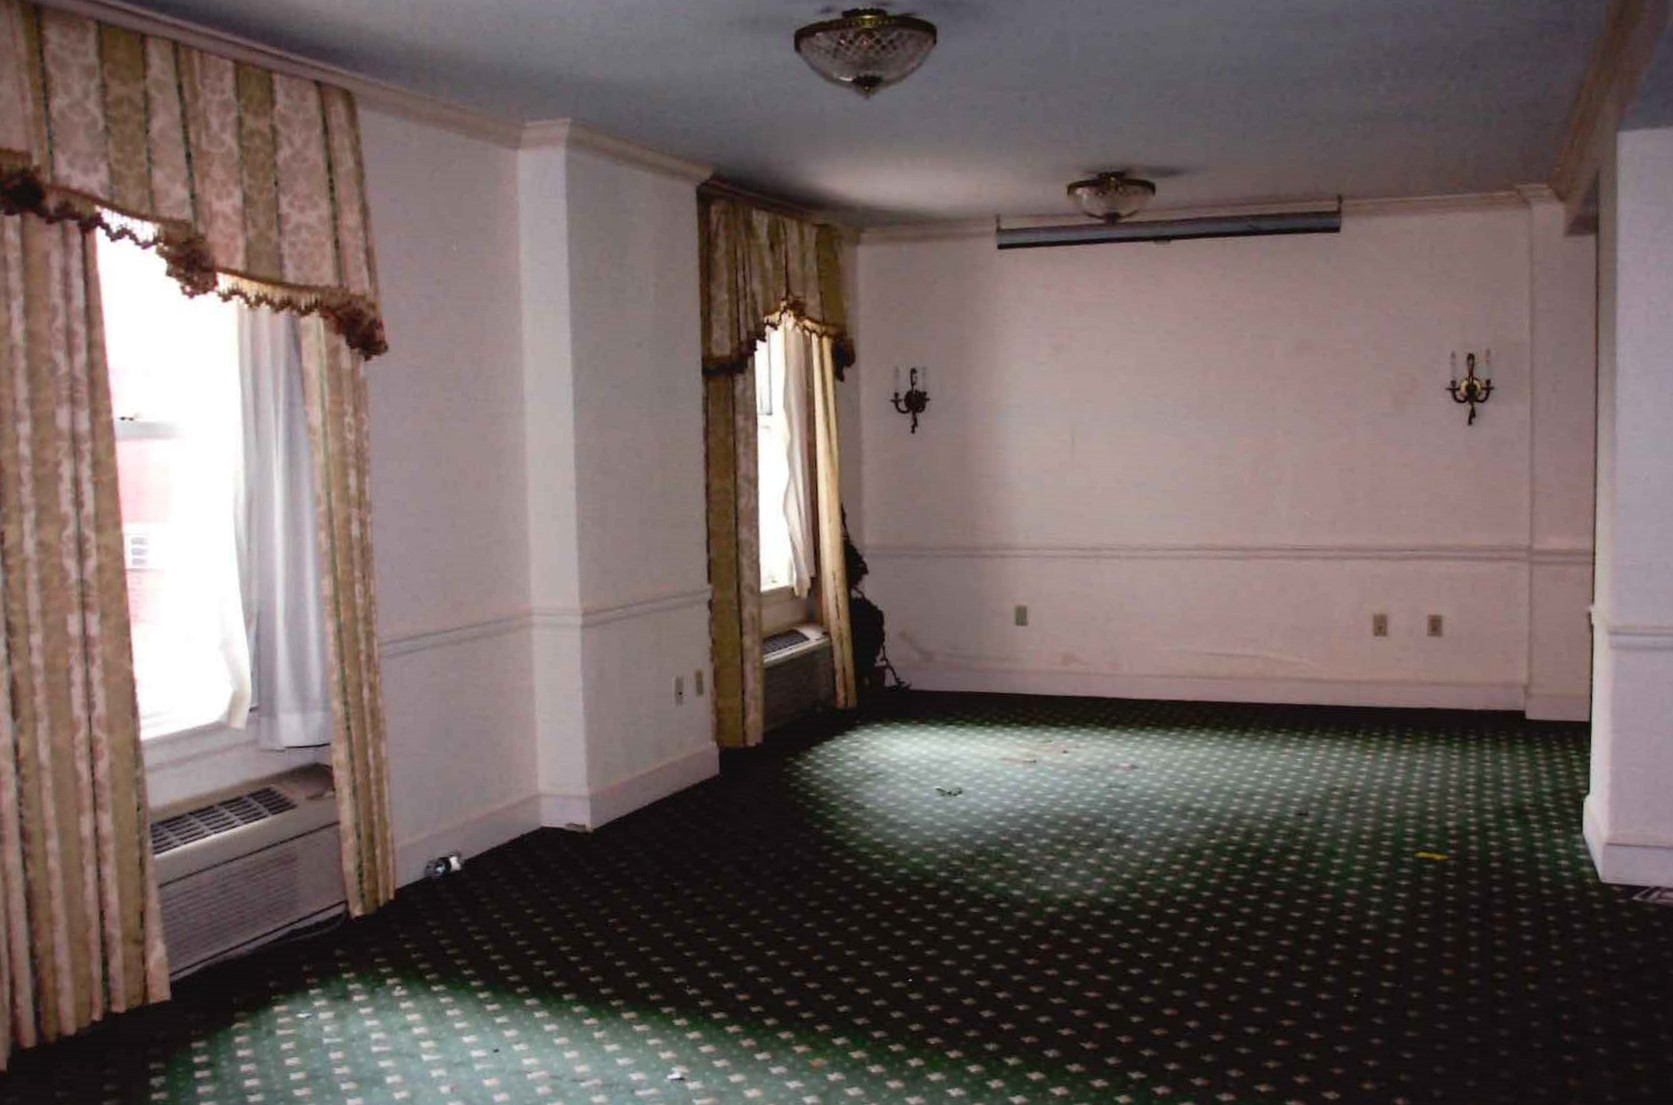 Empty room with curtains at windows.